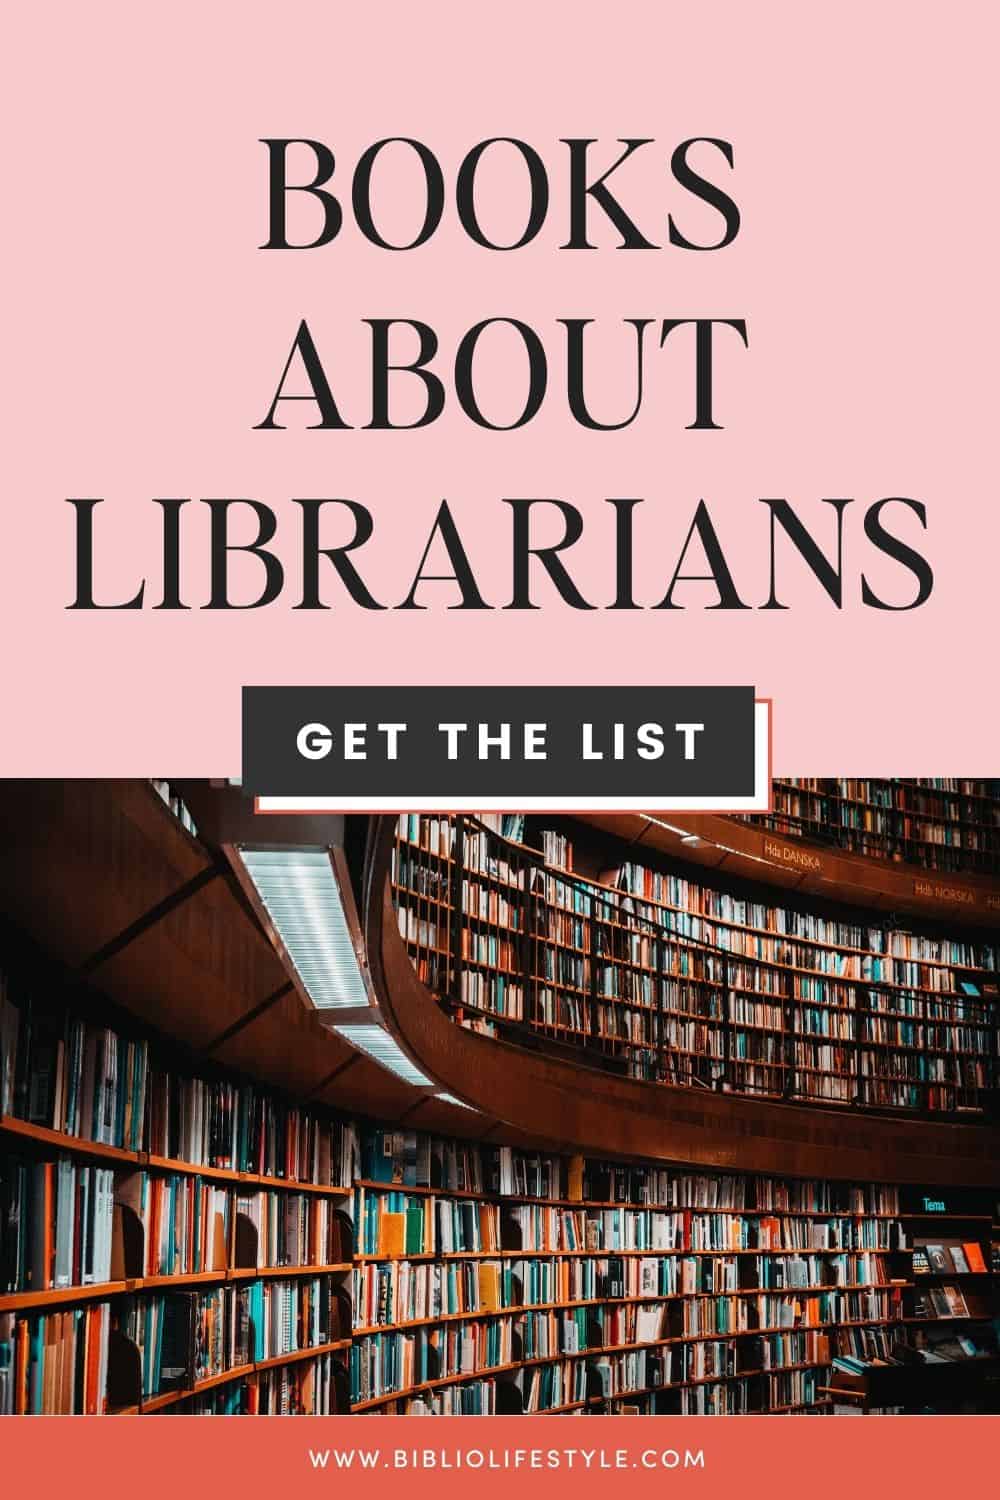 Books About Librarians